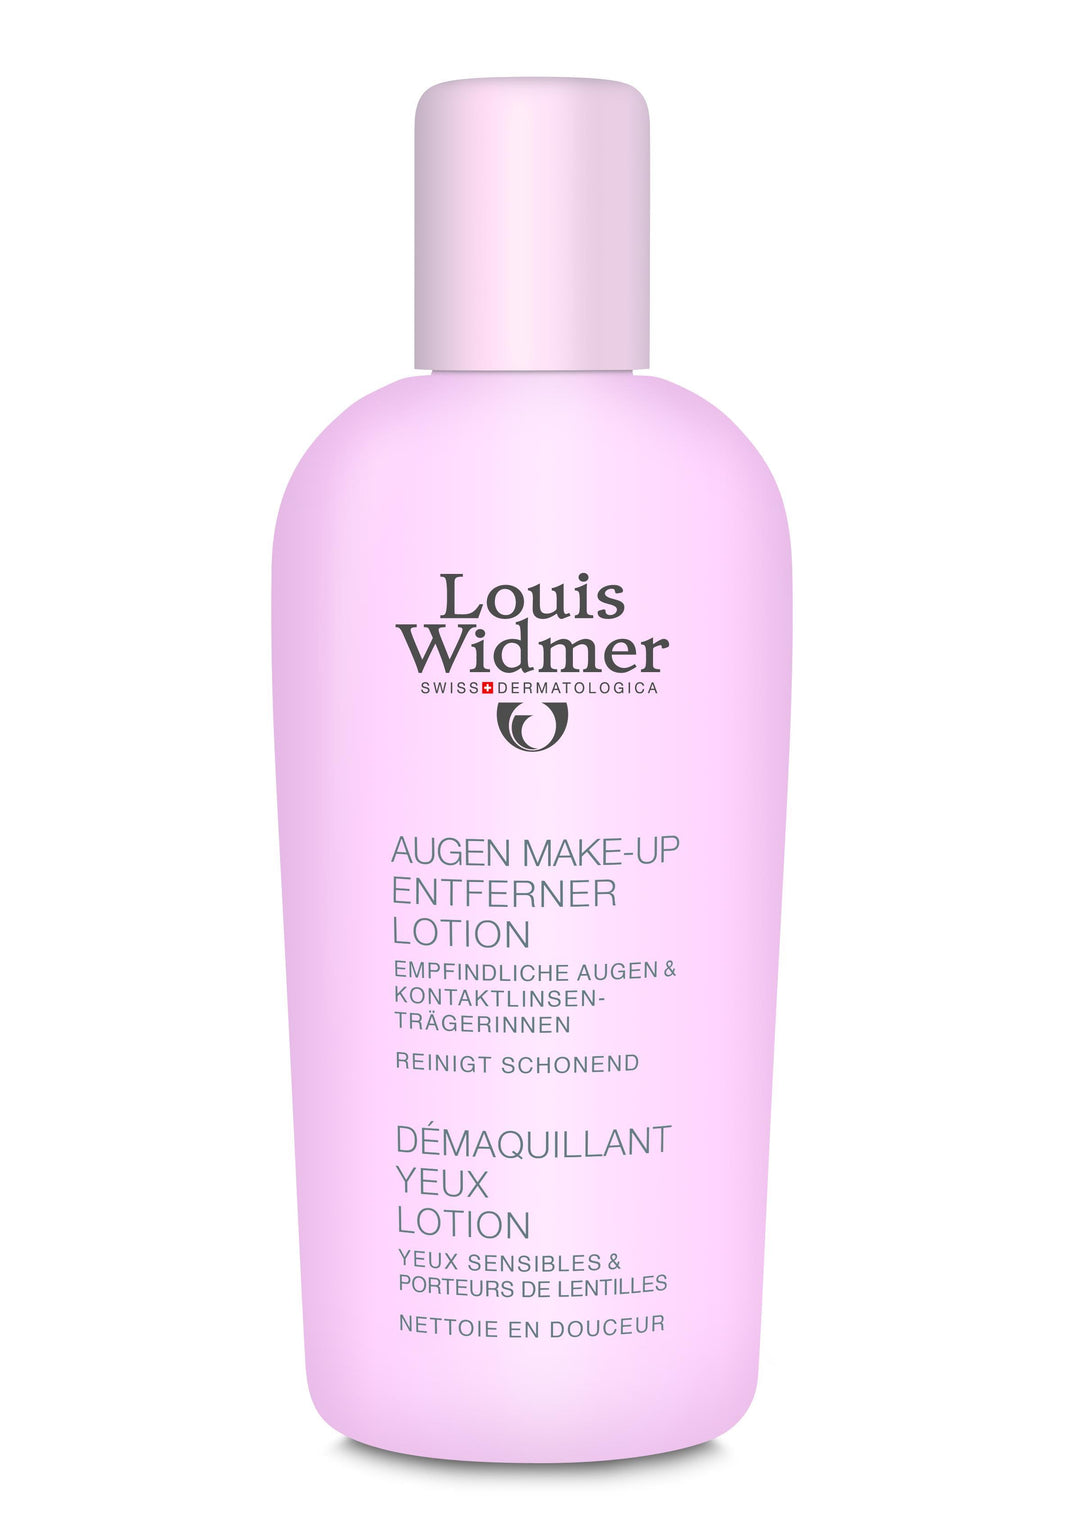 Louis Widmer Oogmake-up Reiniging Lotion - SkinEffects Zwolle